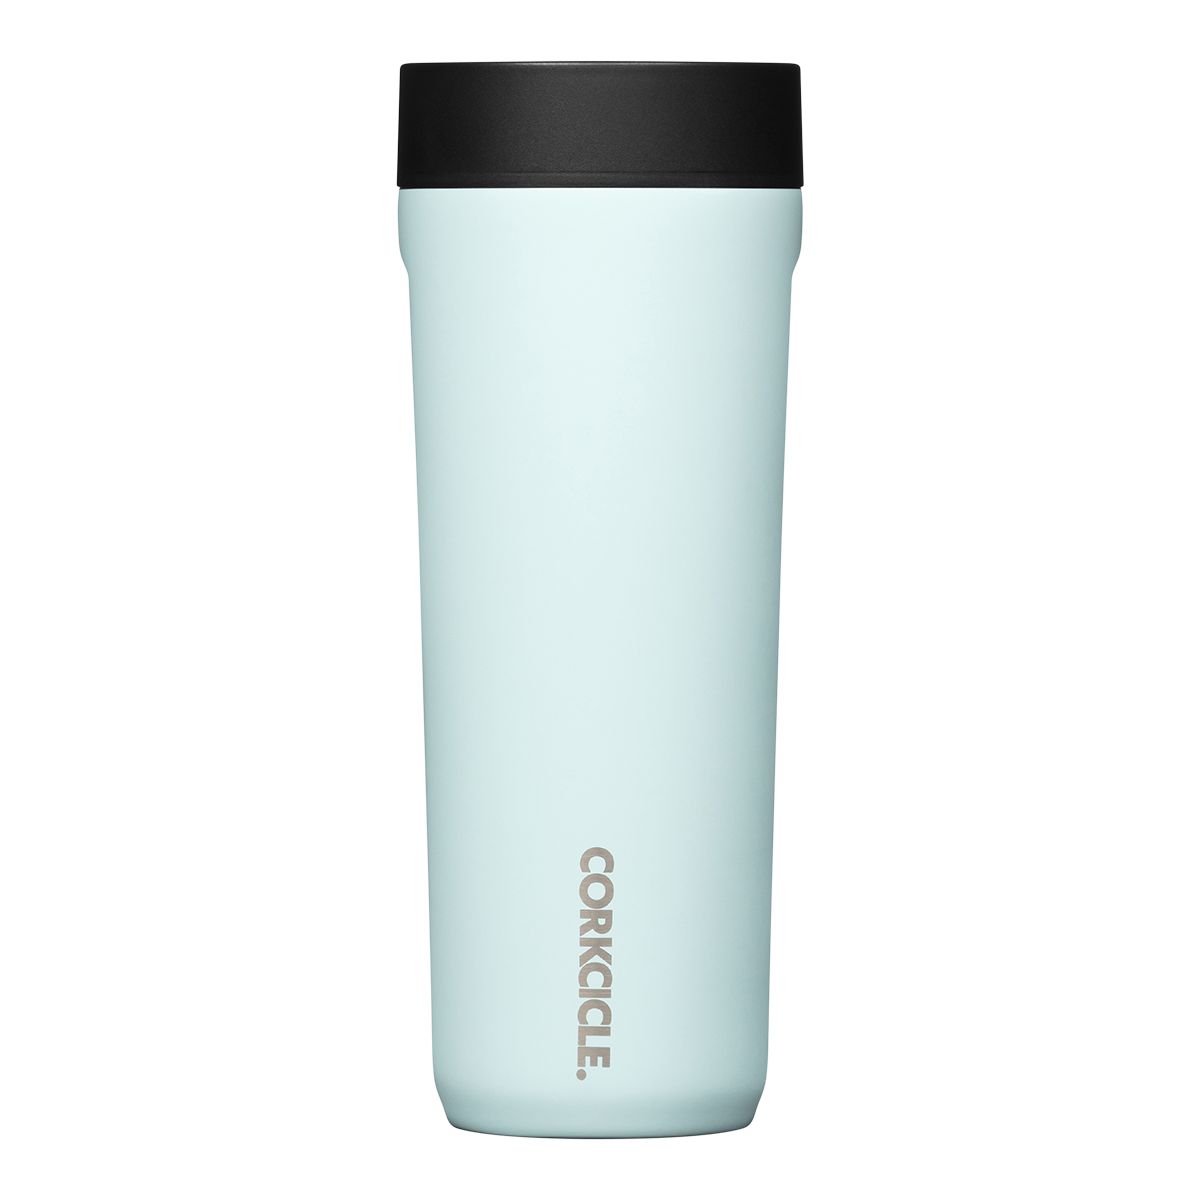 Image of Corkcicle Commuter 17 oz Cup